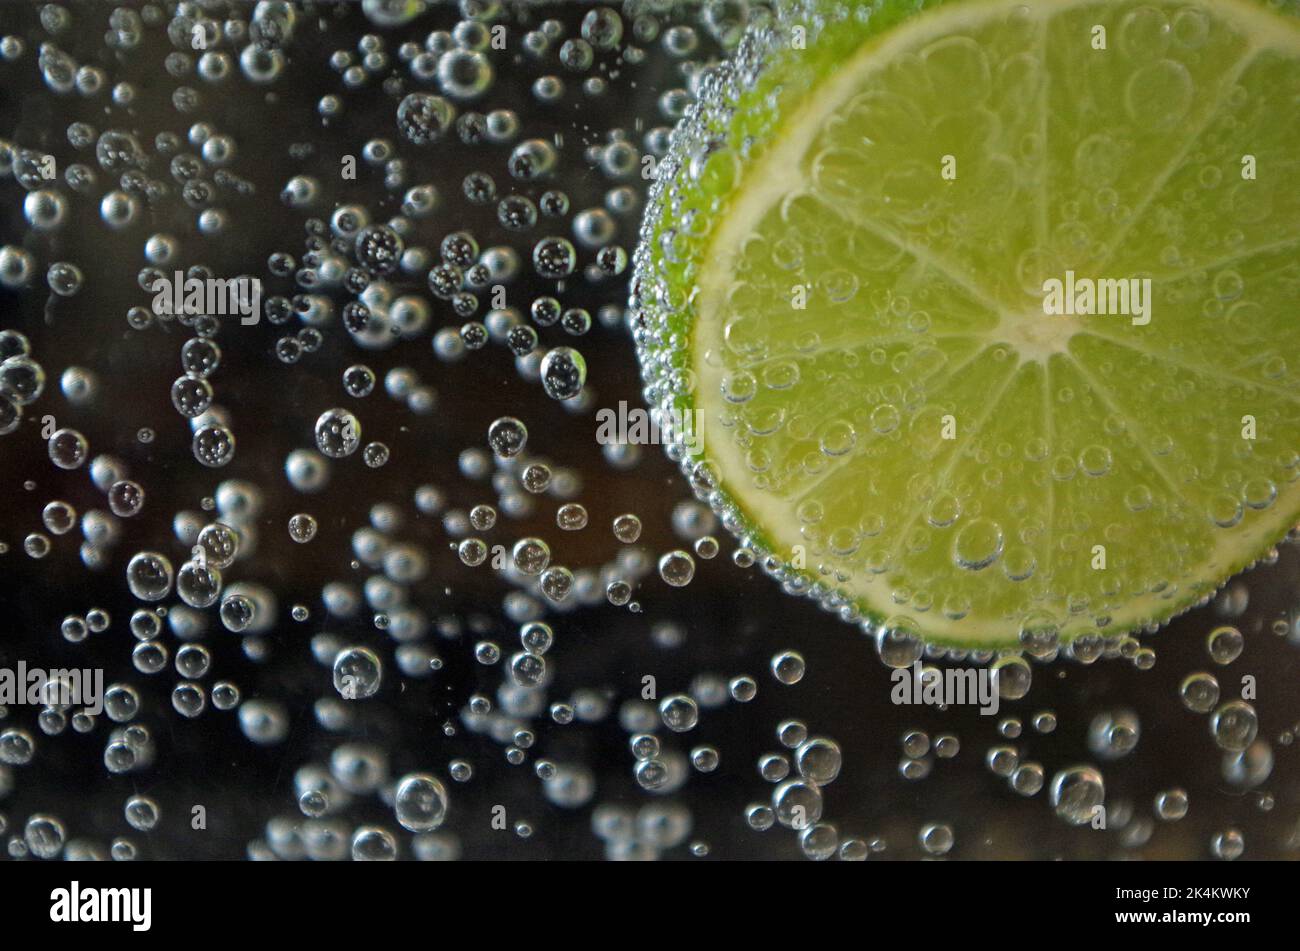 Carbon dioxide together with a Lemon. Stock Photo